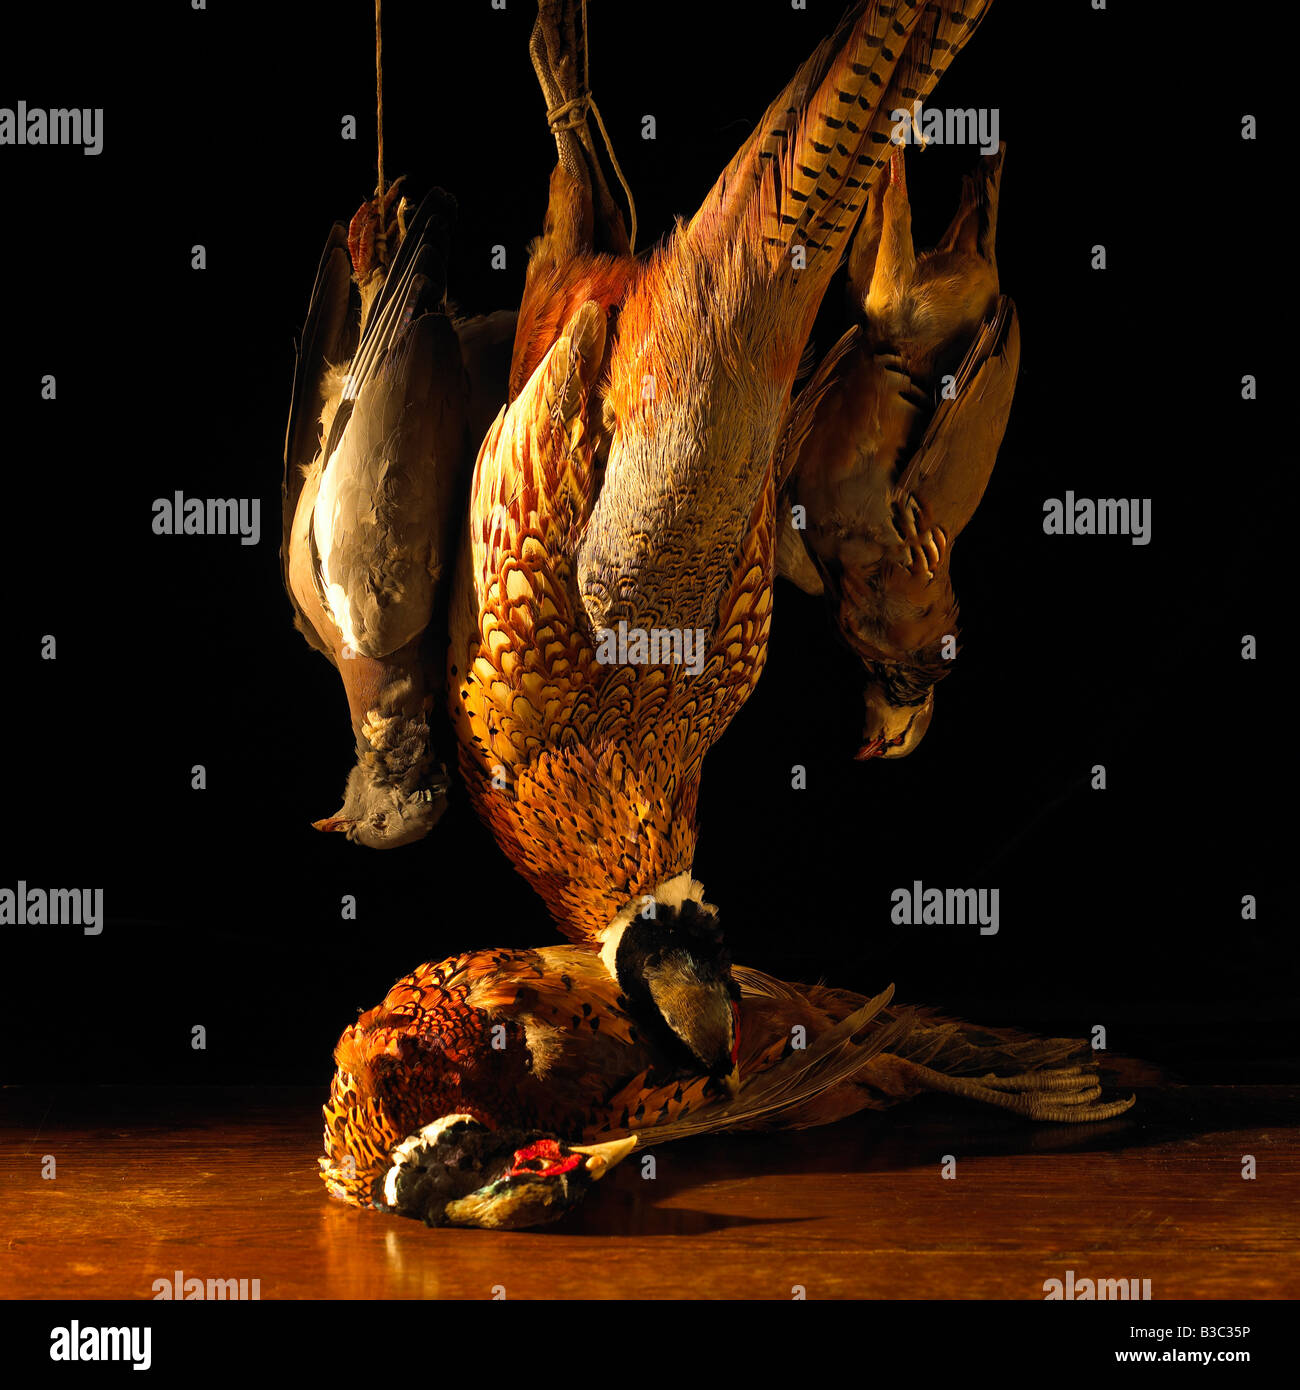 Game birds hanging above a table Stock Photo